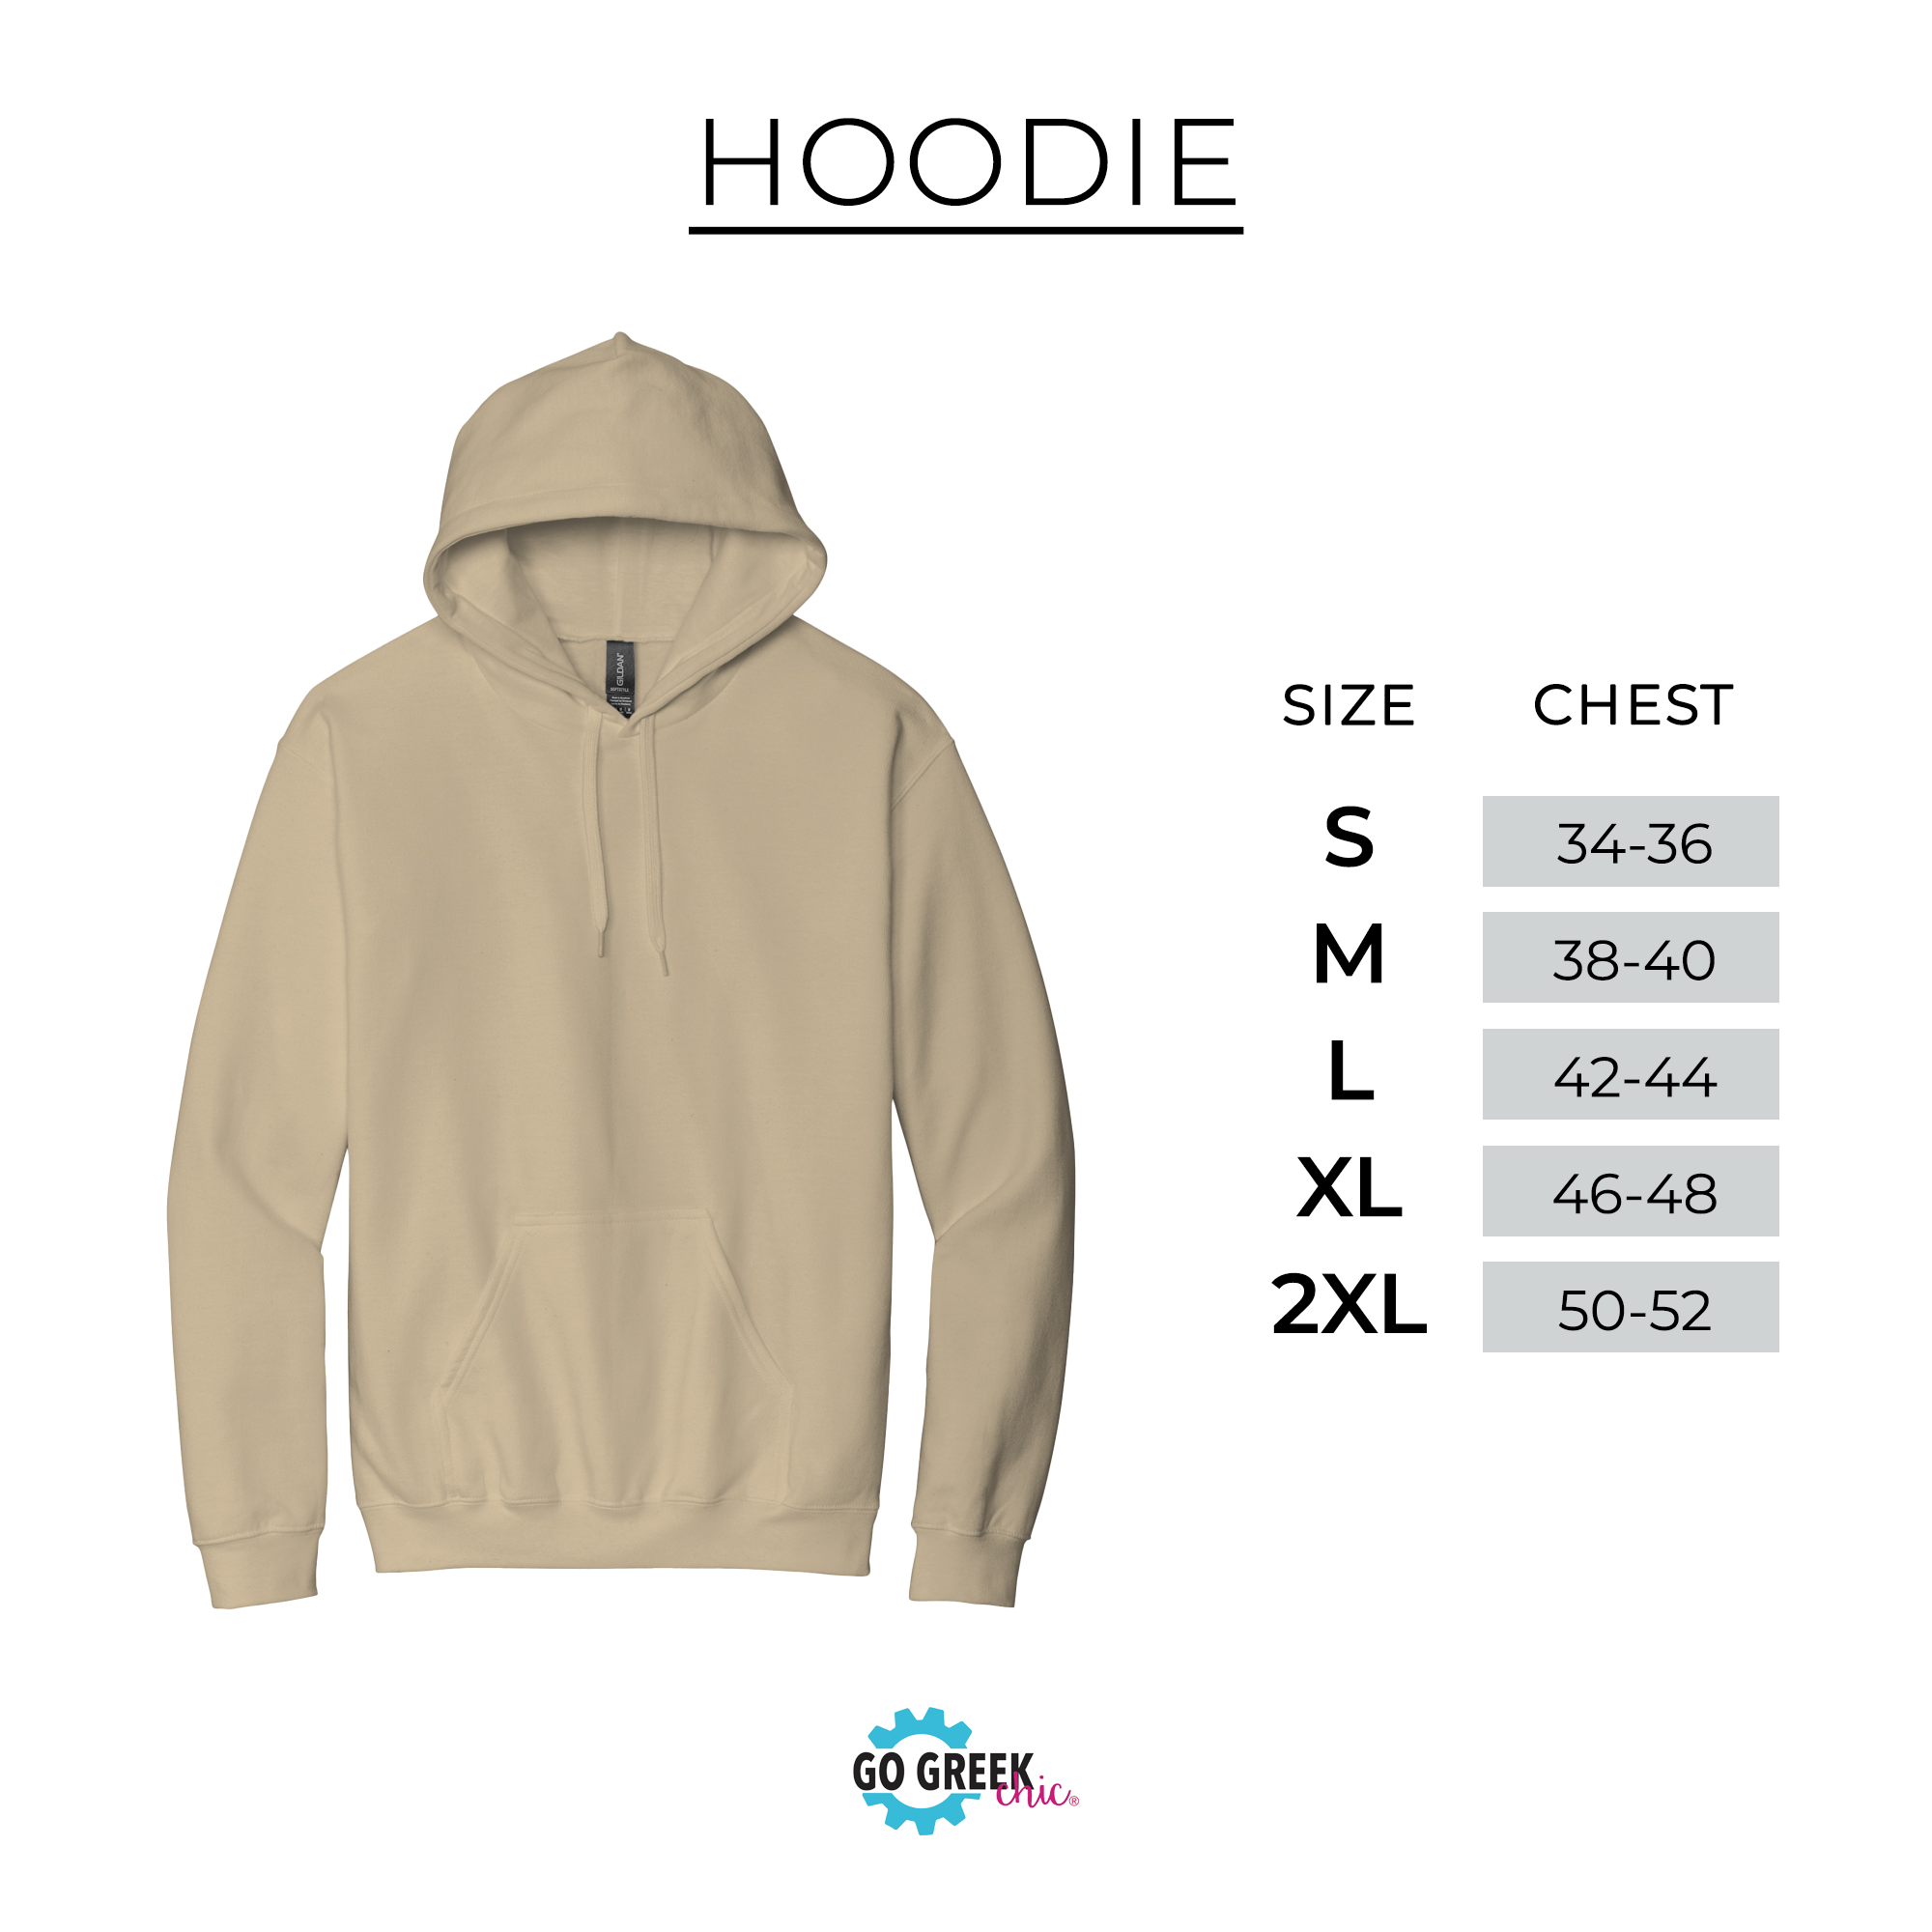 a hoodie size guide for men and women